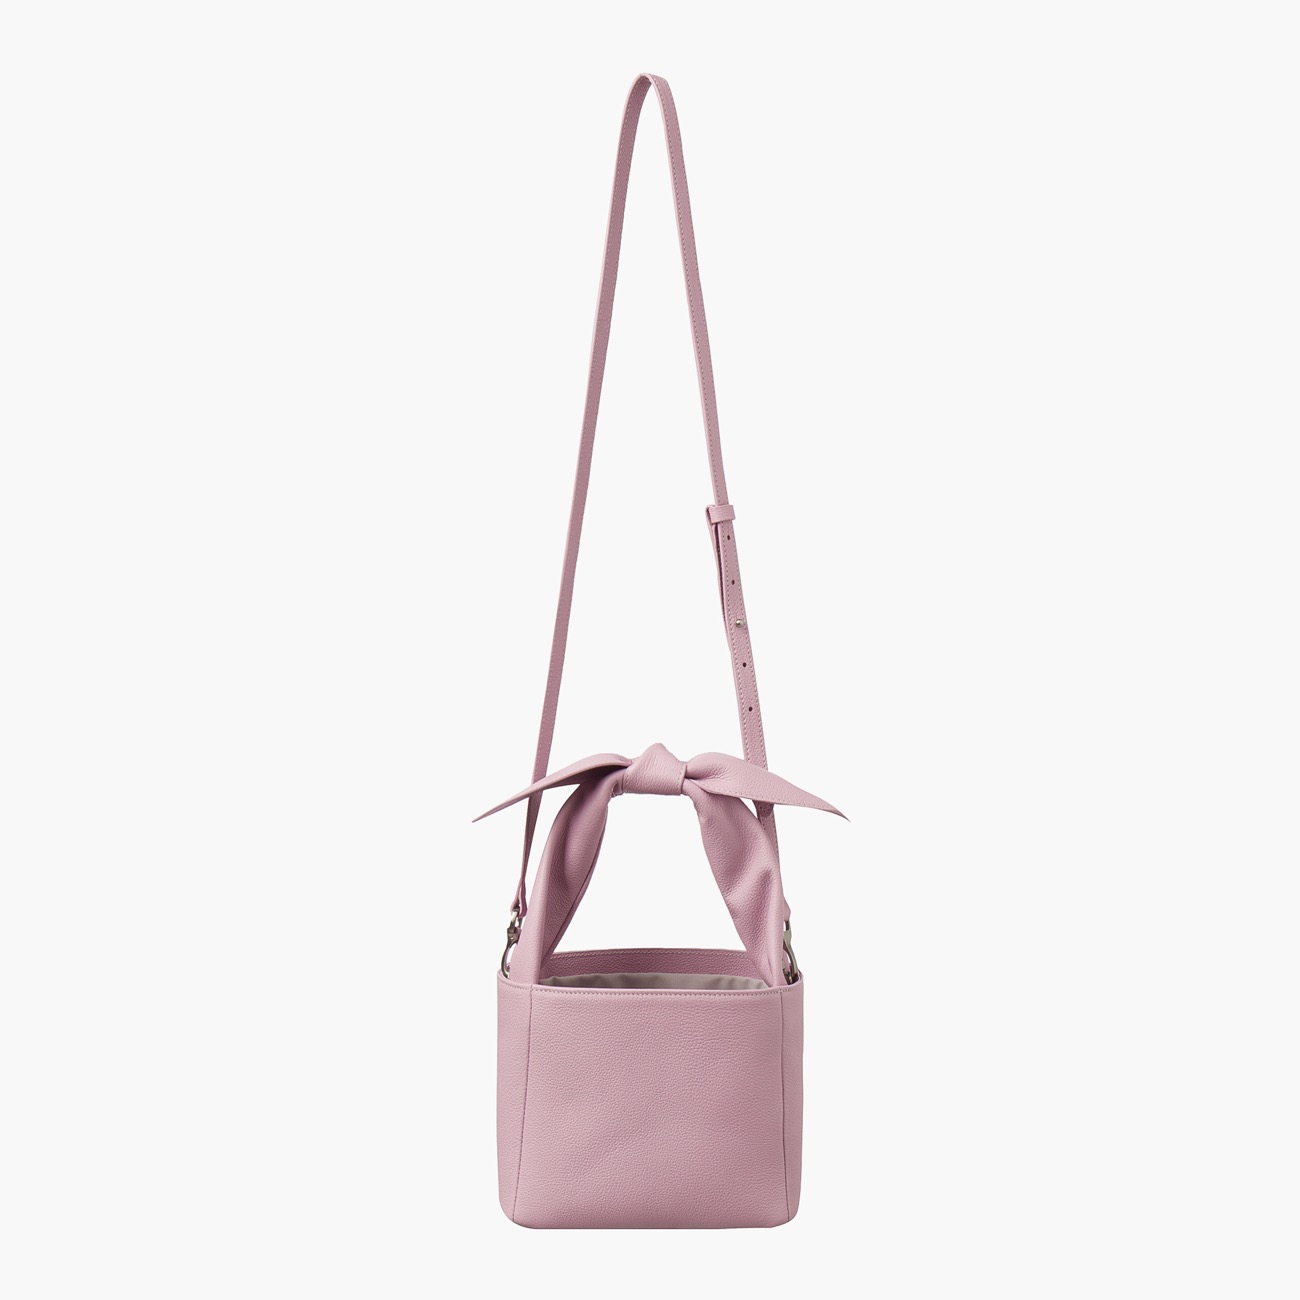 KNOTTED HANDLE LEATHER BAG, PINK